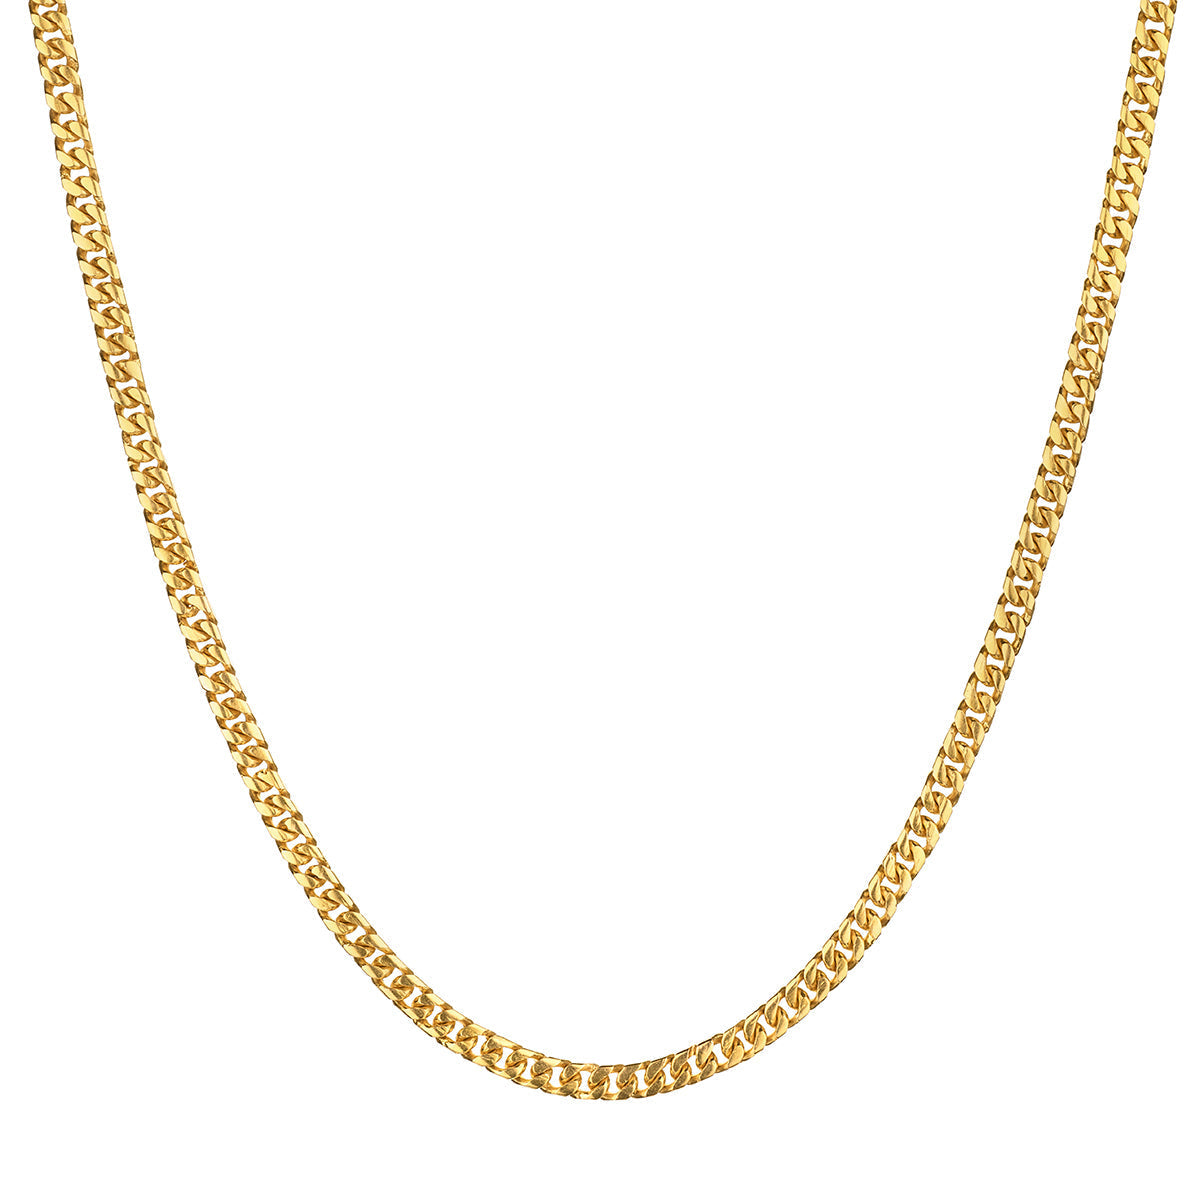 14kt Yellow Gold Solid Curb Link Chain. Weight: 42.14 grams